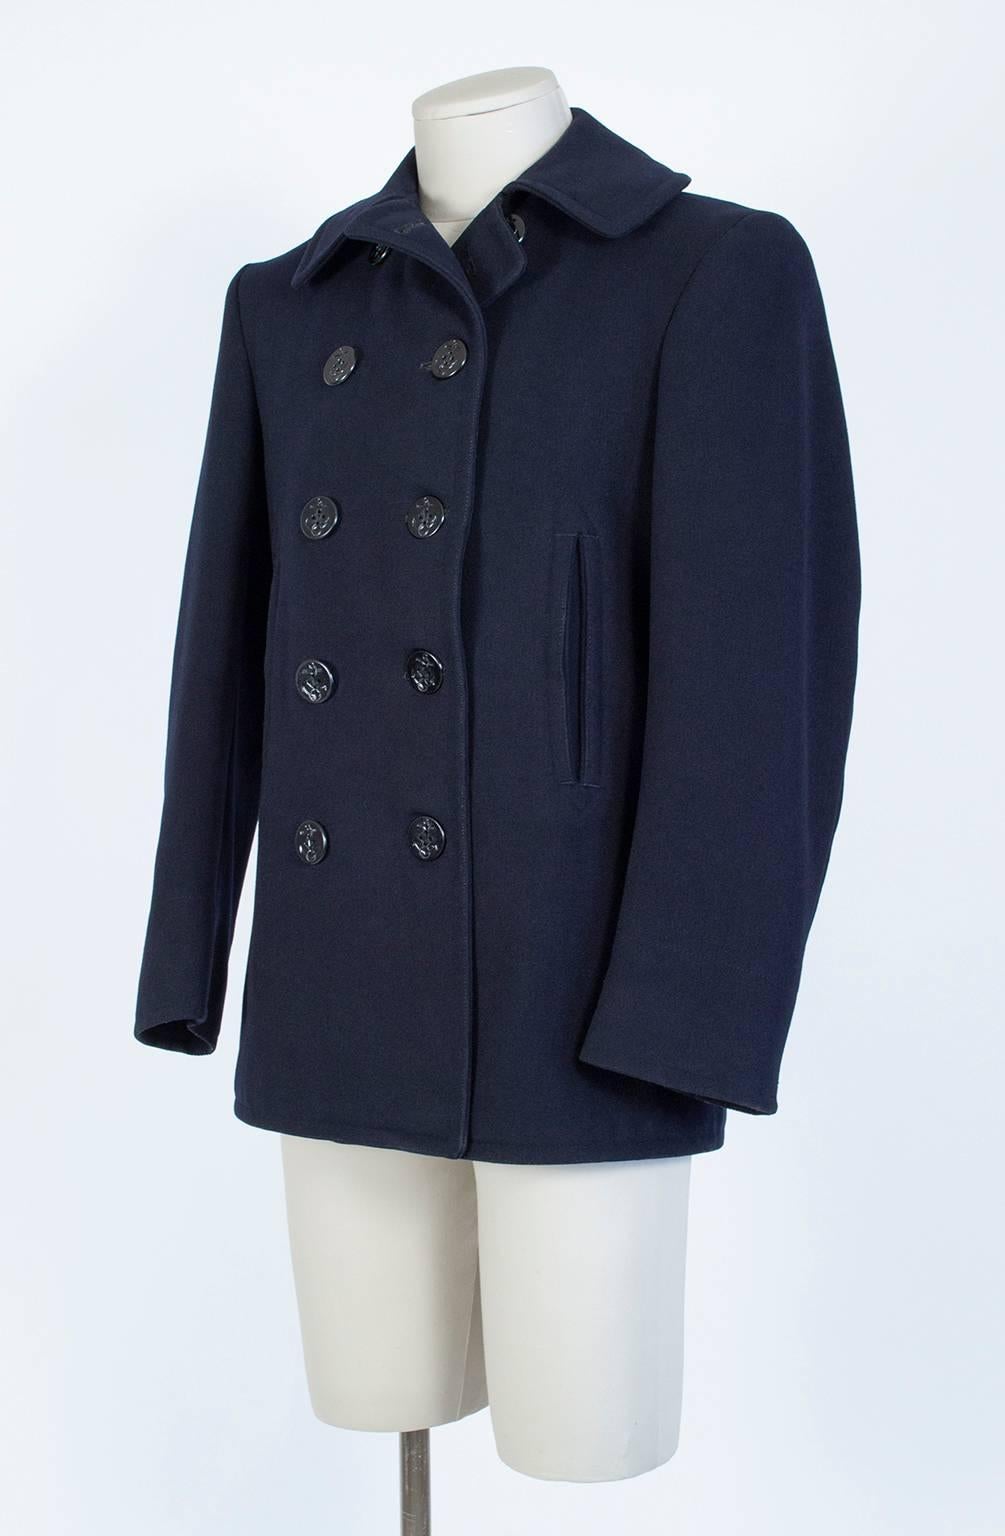 Like its cousin the trench coat, the pea coat enjoys military origins but its style and practicality have made it a civilian wardrobe staple. Slimmer in cut than its modern counterparts, this WWII version is also made of rare 32 oz Kersey wool, the